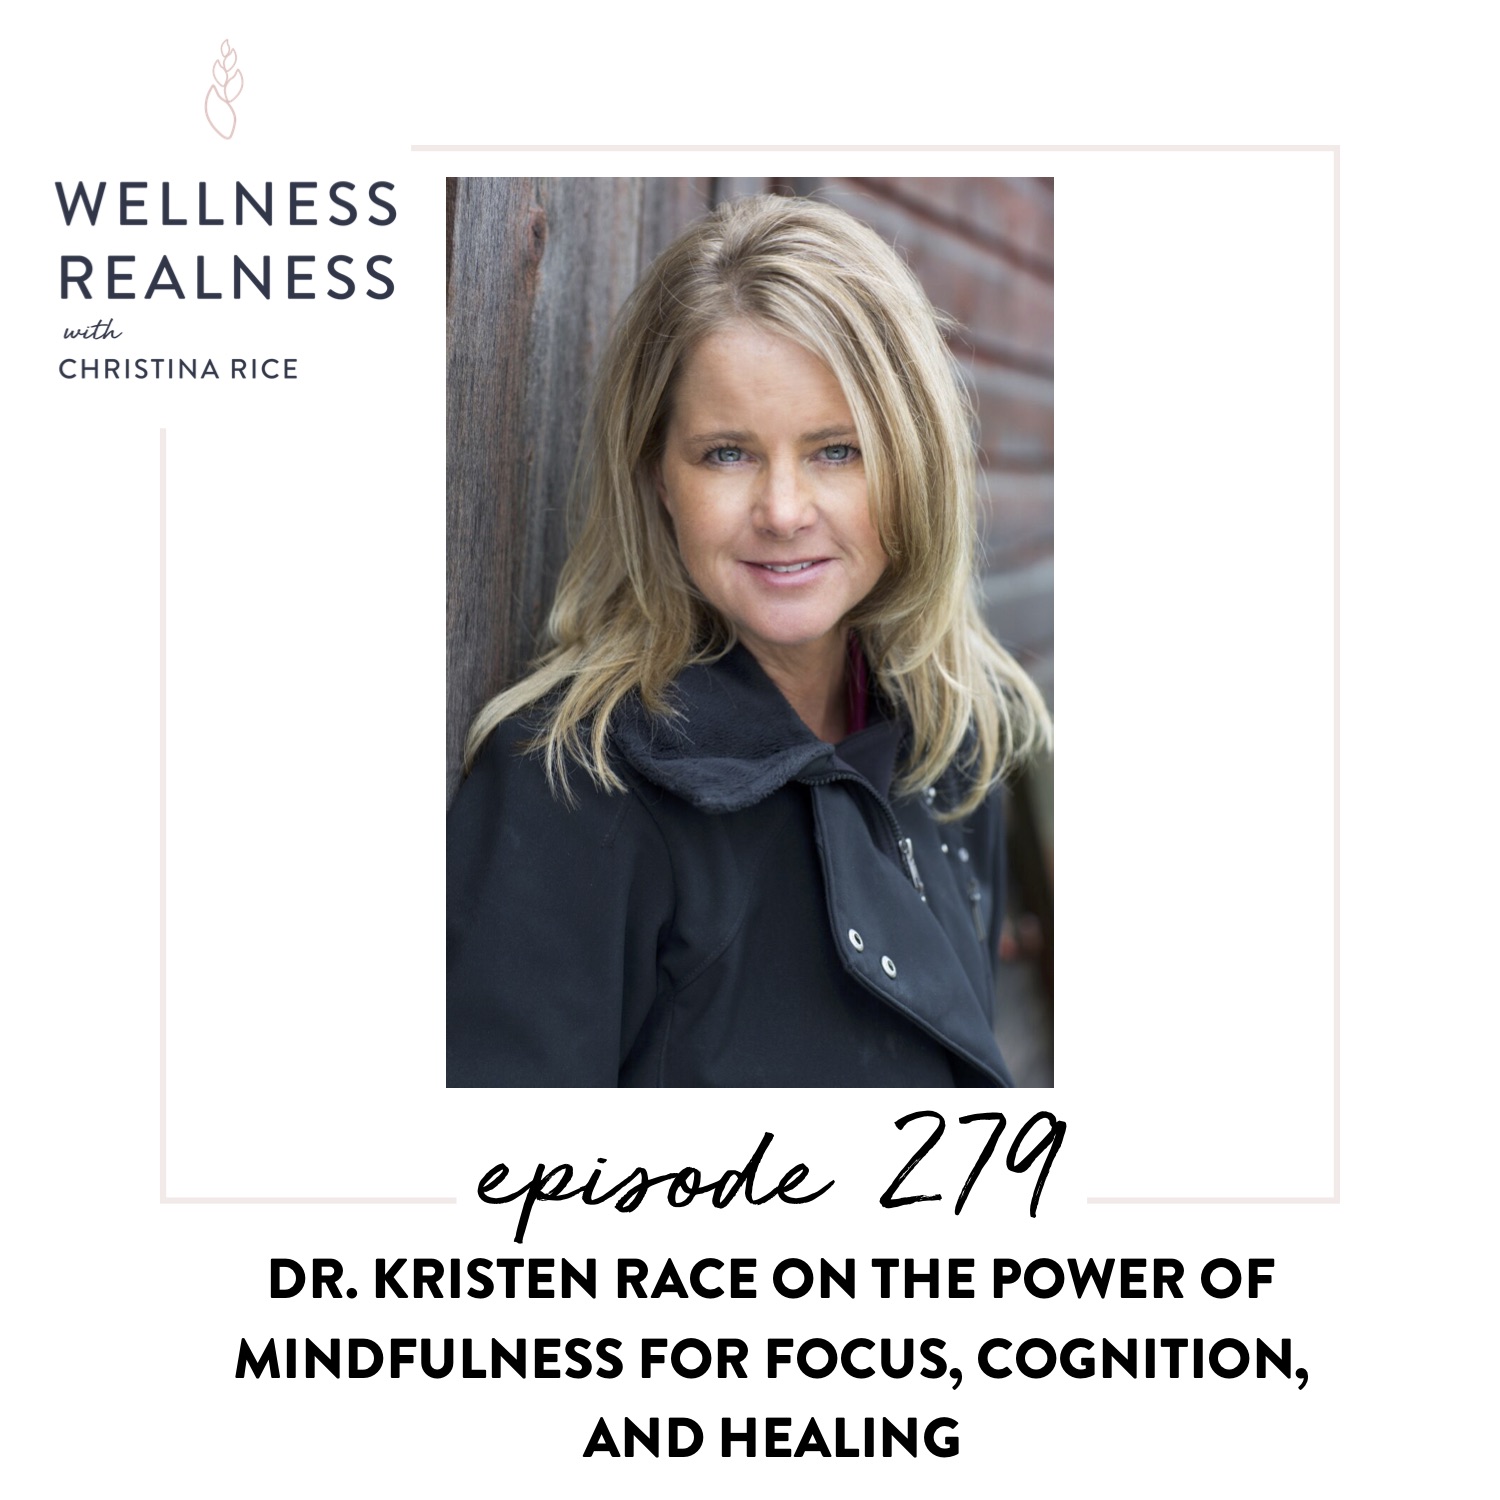 279: Dr. Kristen Race on the Power of Mindfulness for Focus, Cognition, and Healing